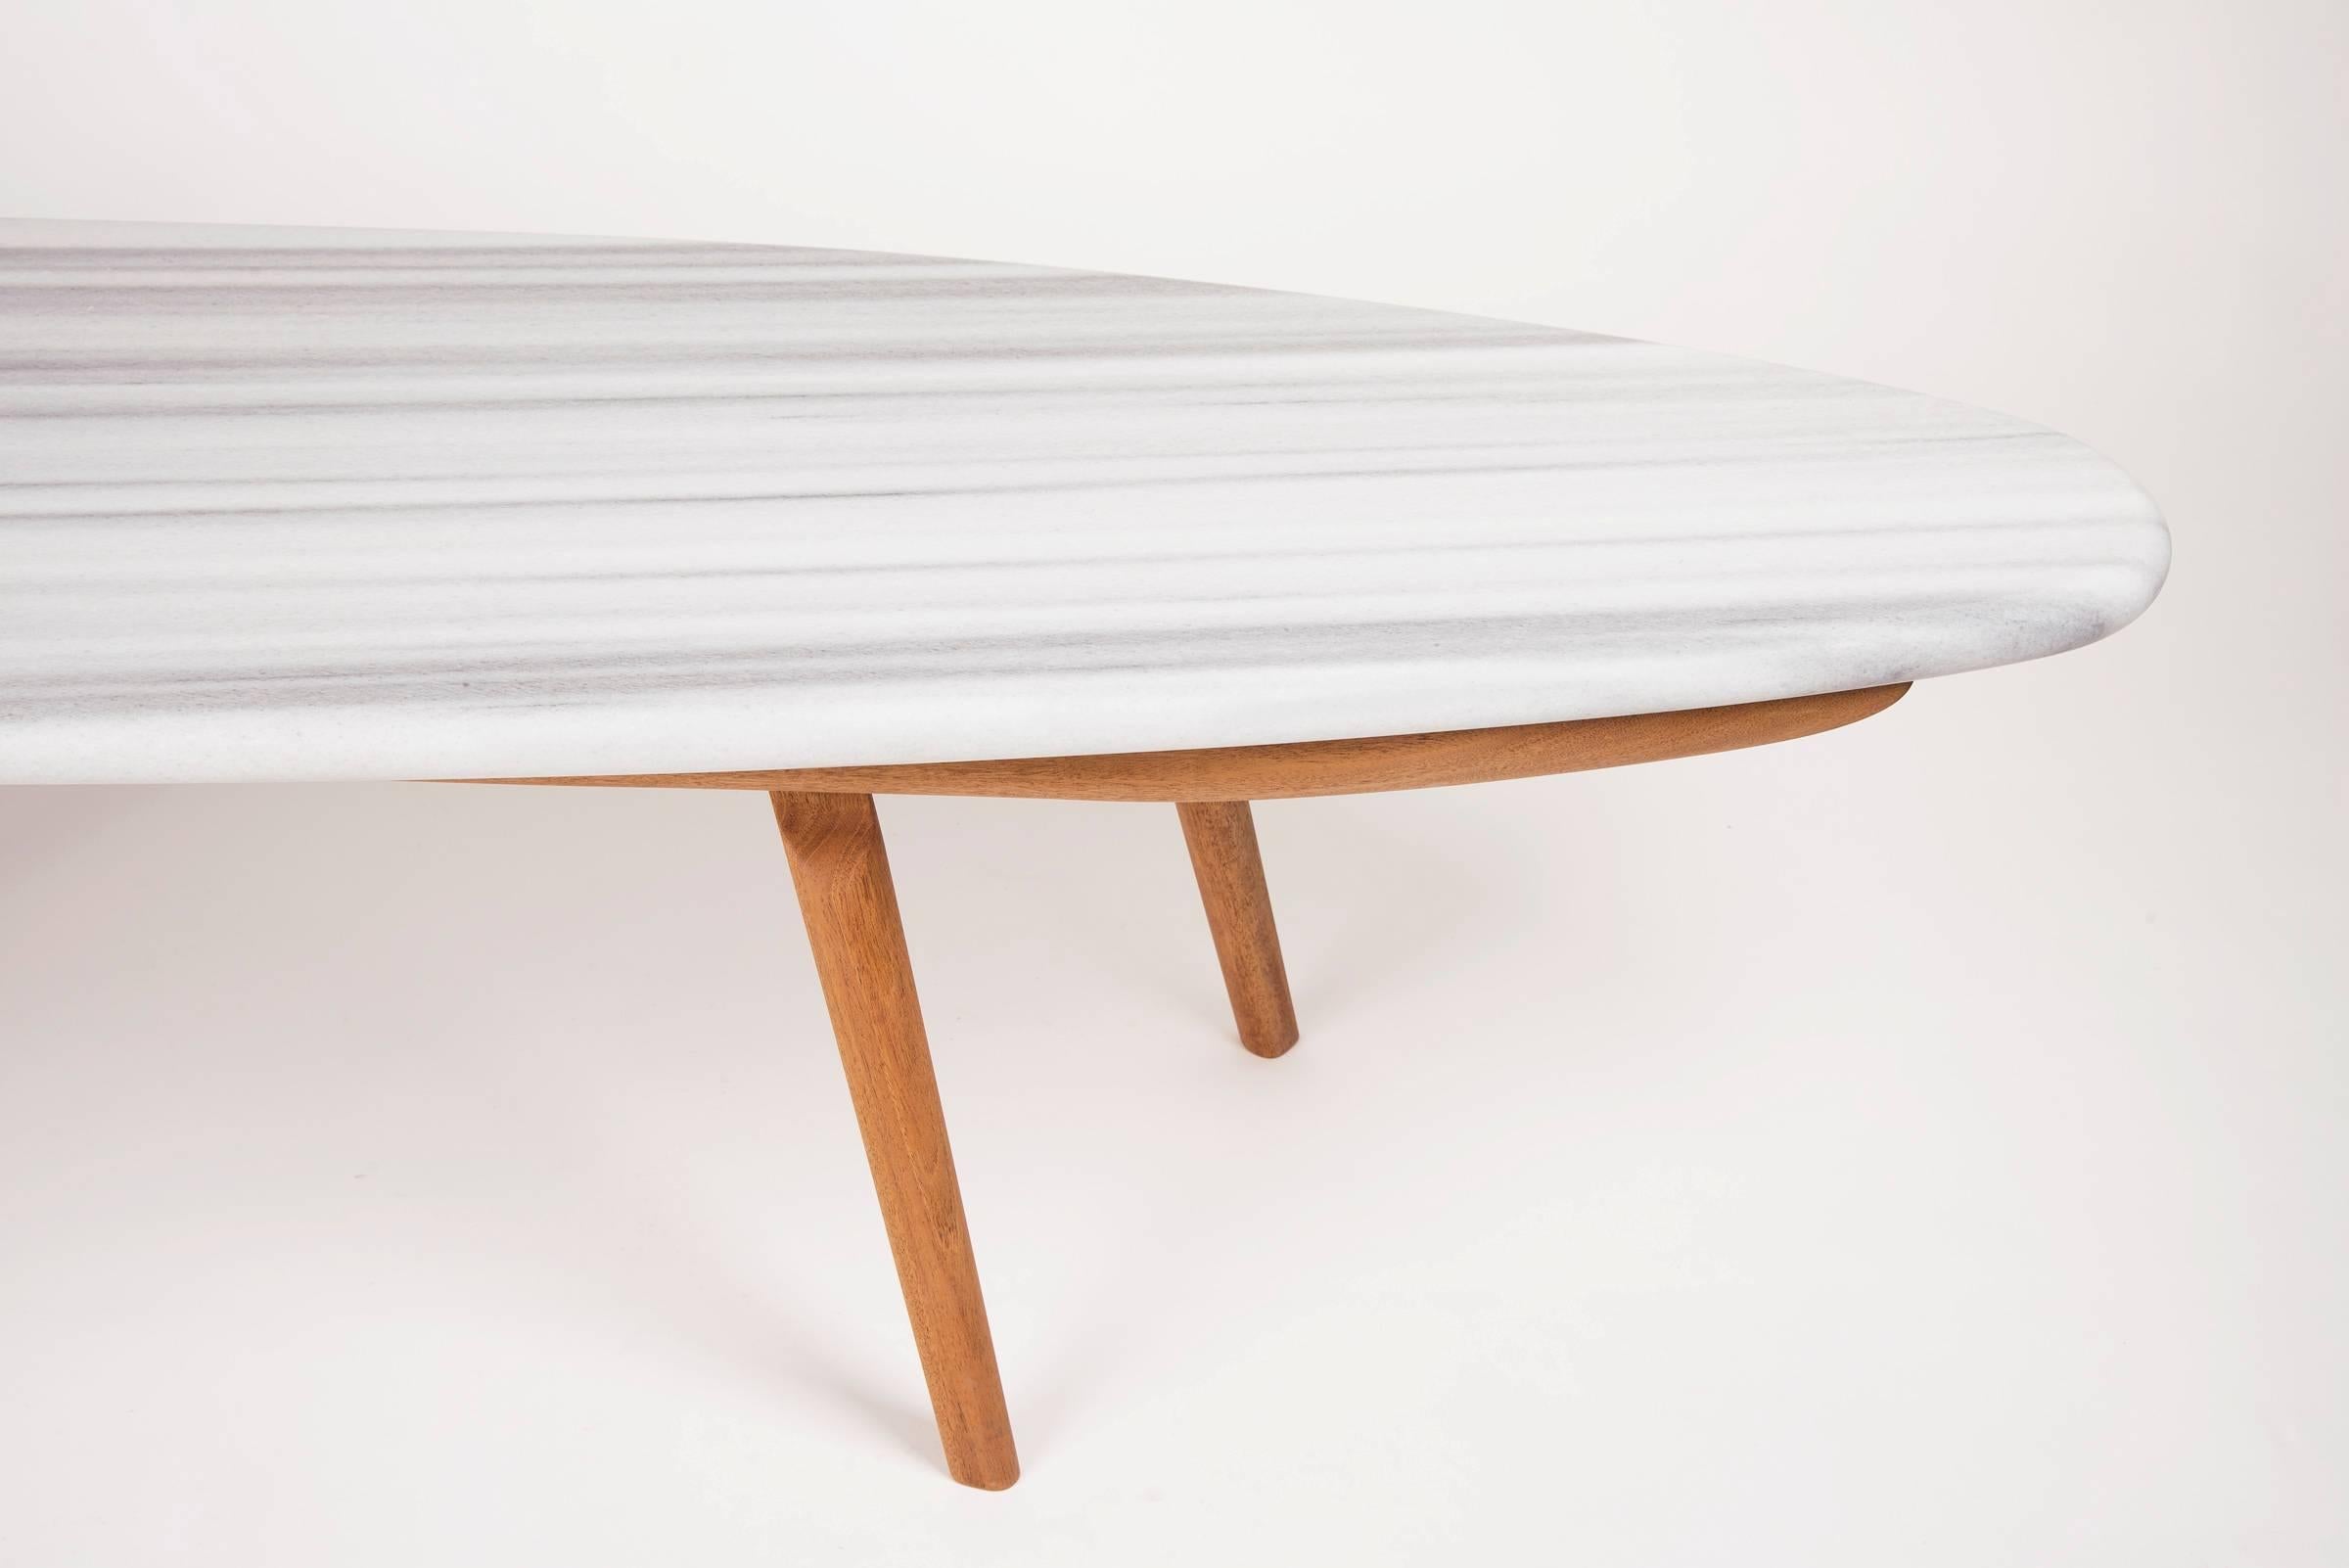 In a similar spirit to the skip table, the Wendel table's form is inspired by hydrodynamics. Like a large stone in a moving body of water, the Wendel Table holds its place in any setting. The honed Zebra marble and oiled Mahogany give a strong